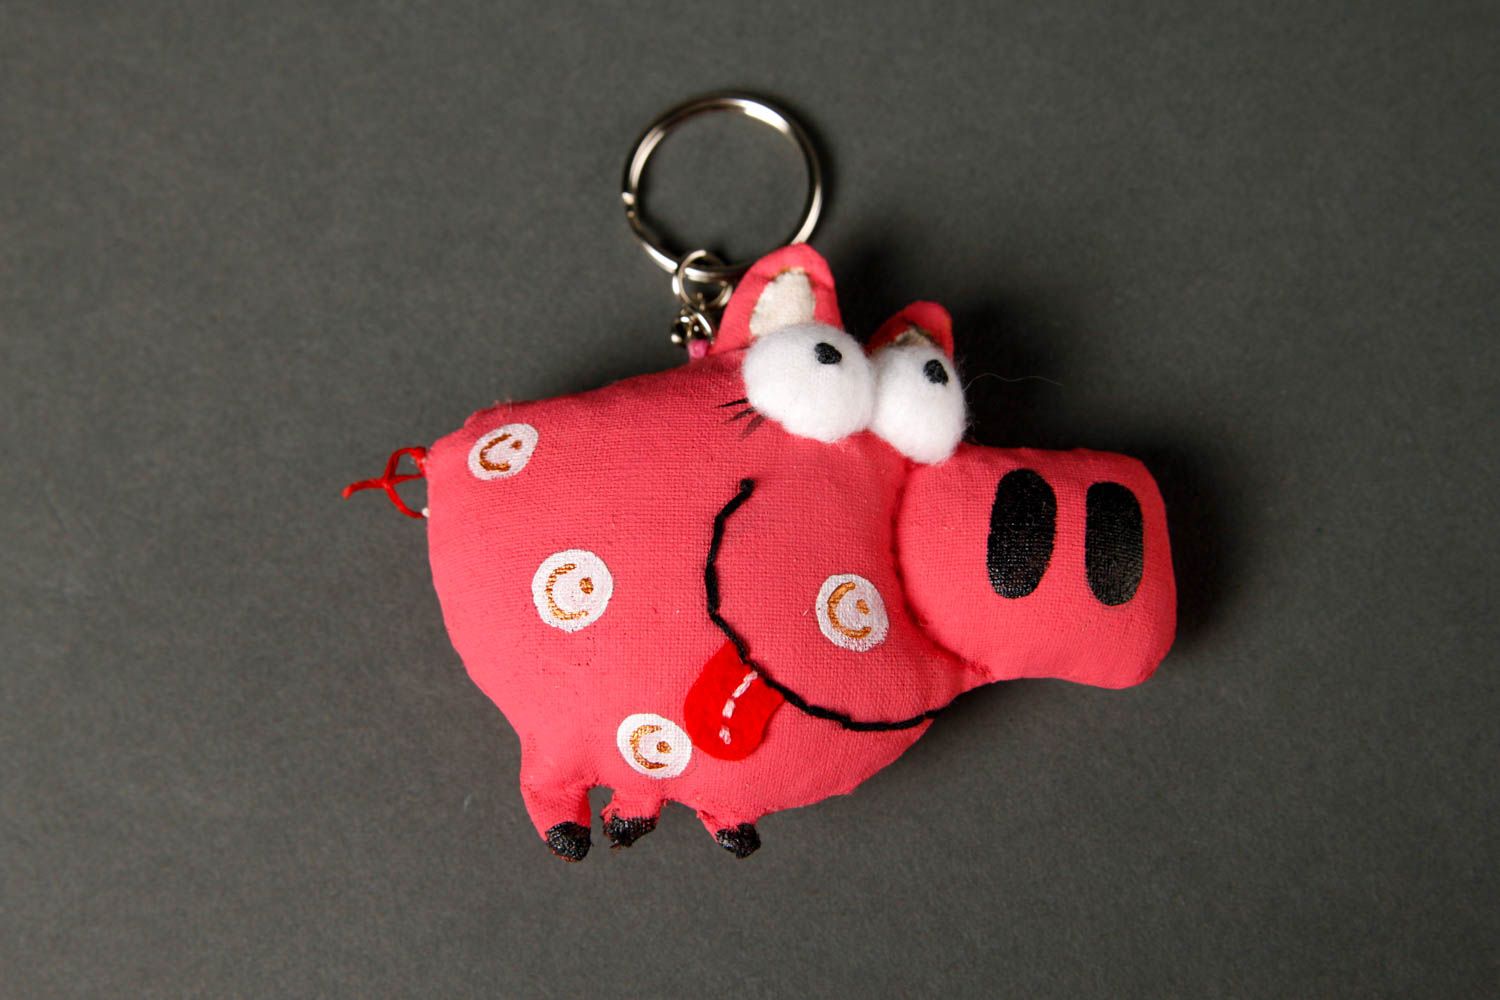 Cute handmade soft keychain phone charm accessories for kids small gifts photo 3